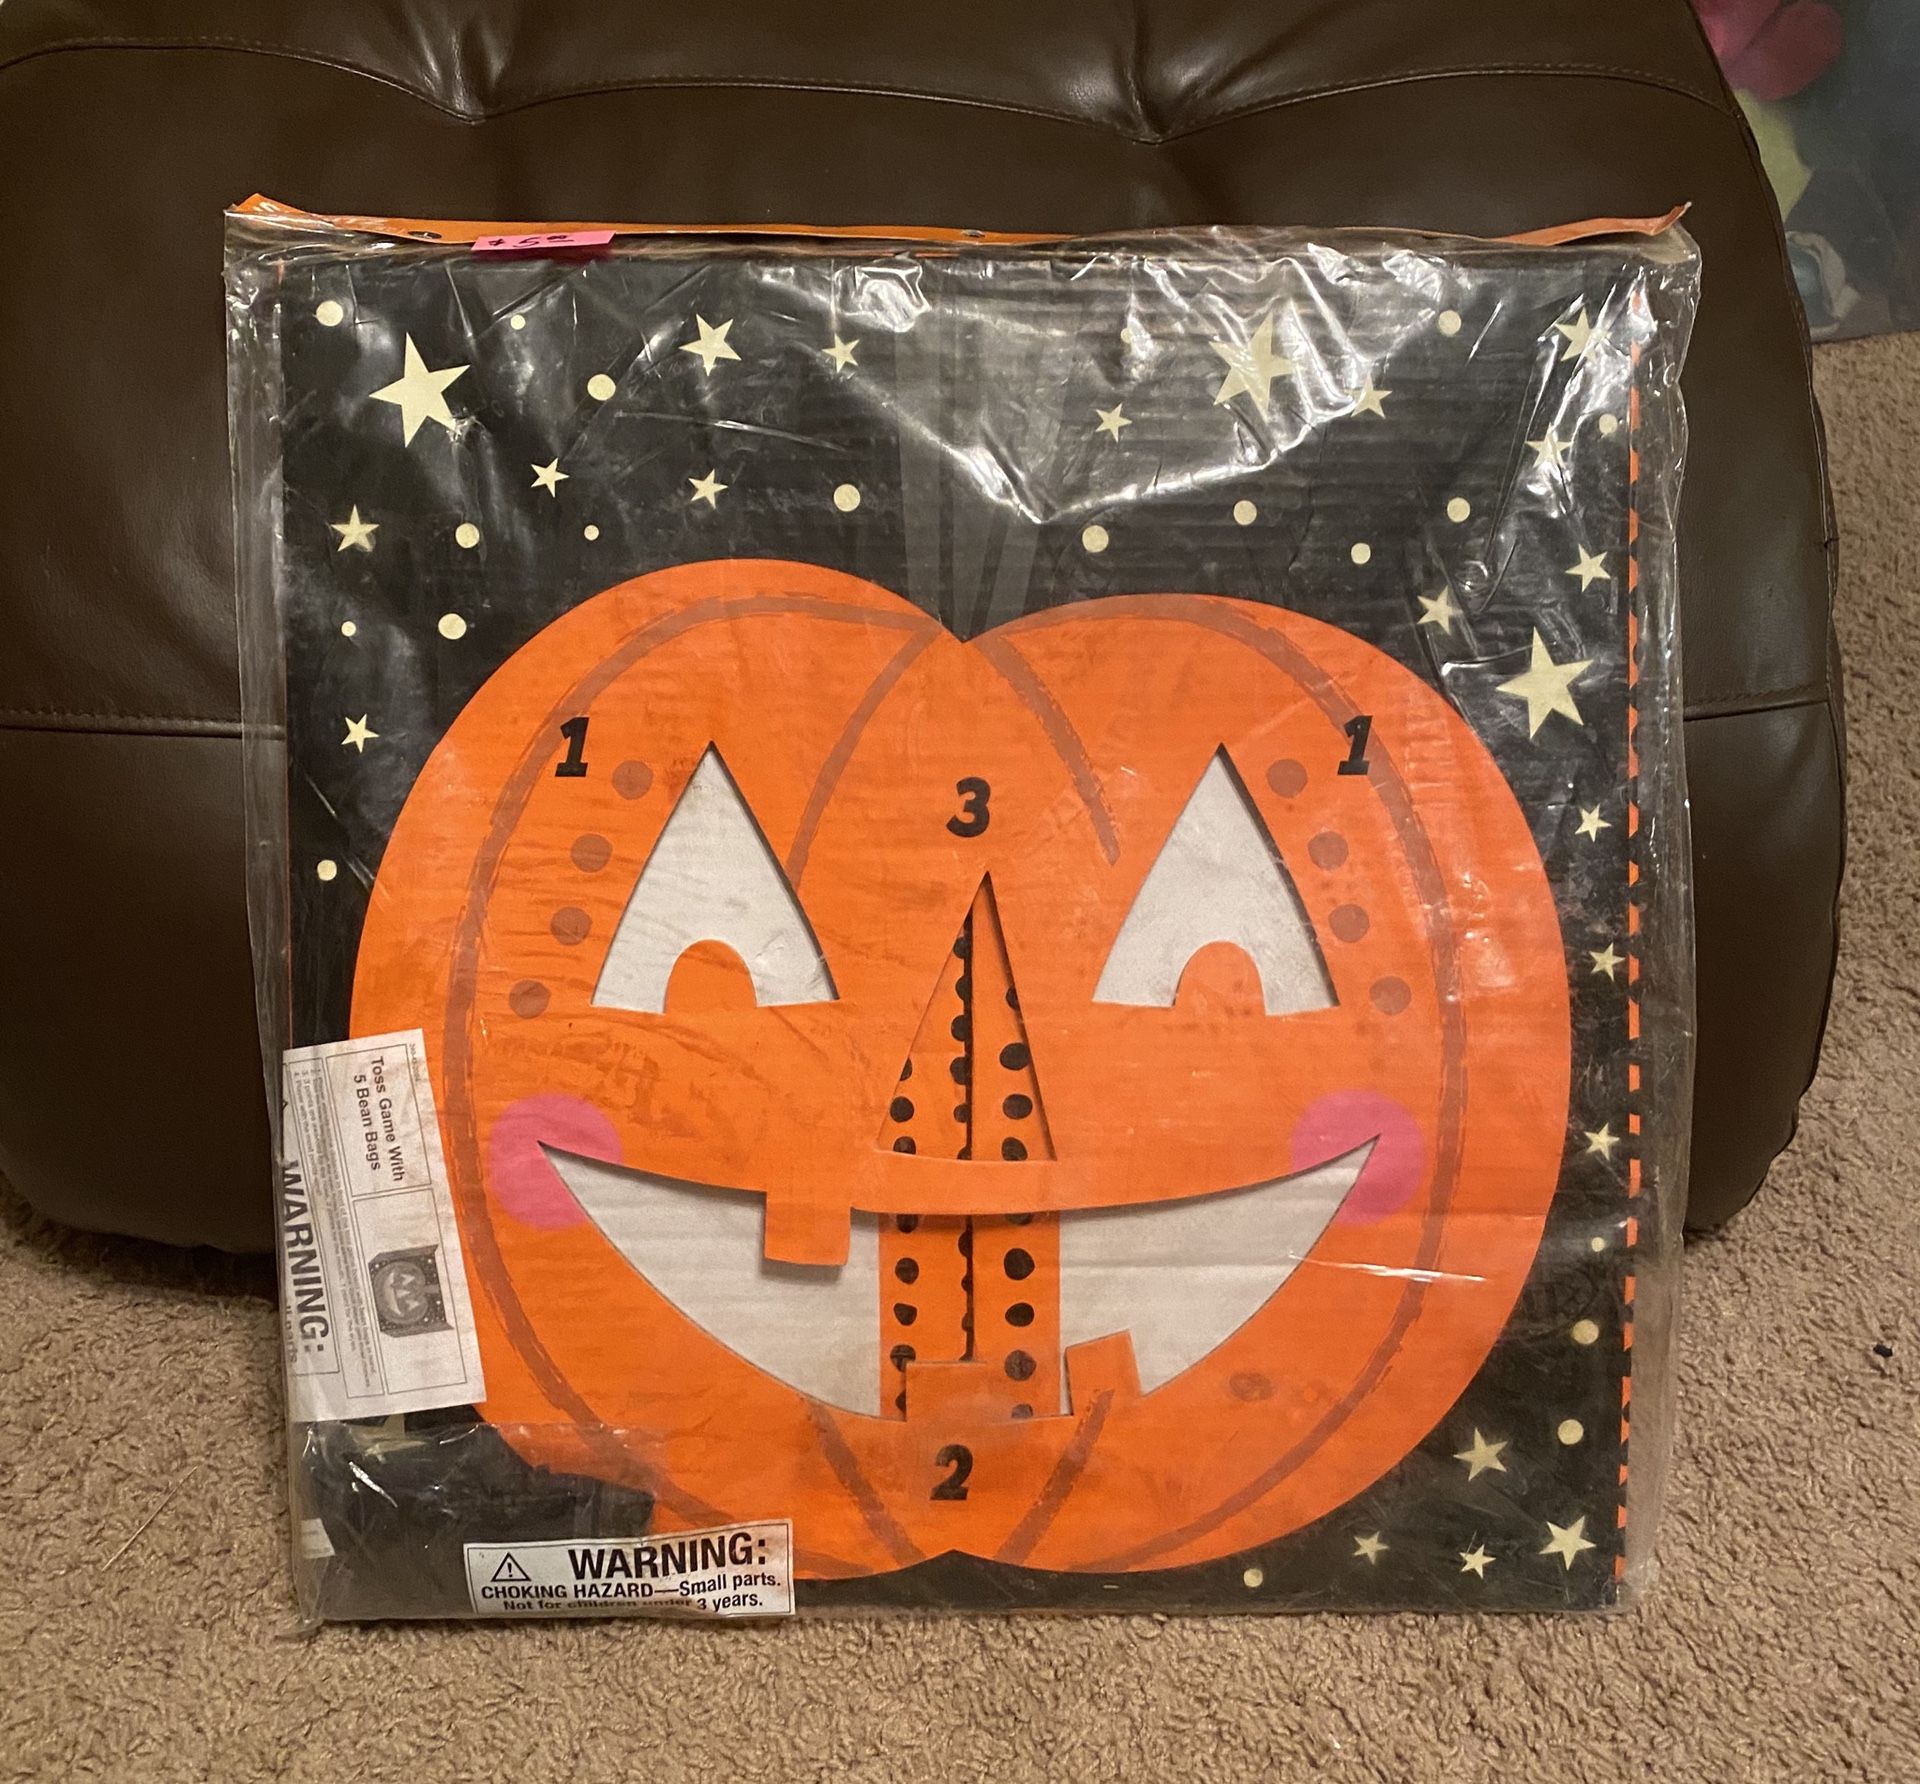 Halloween Jack o lantern beanbag toss game new in package.